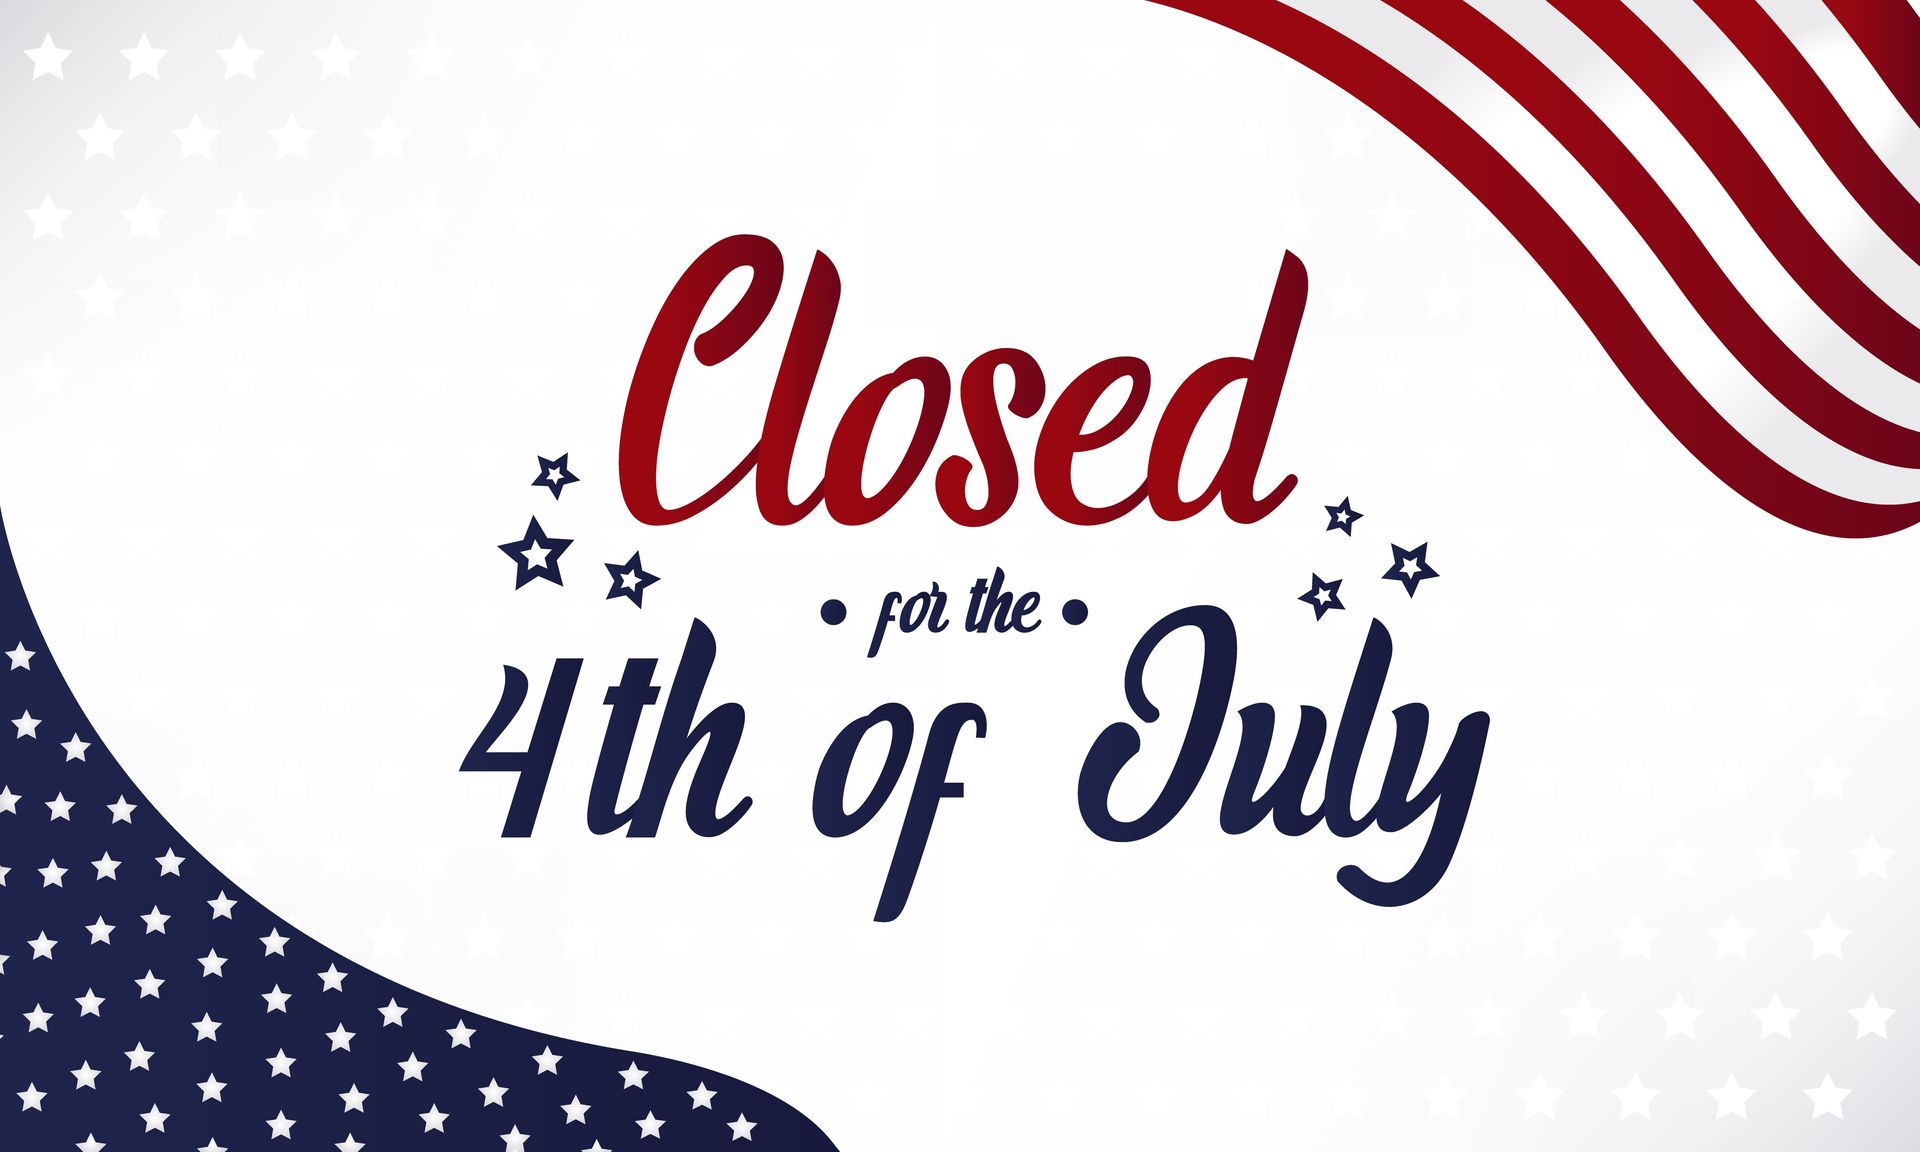 City Services to Close for the Fourth of July Holiday